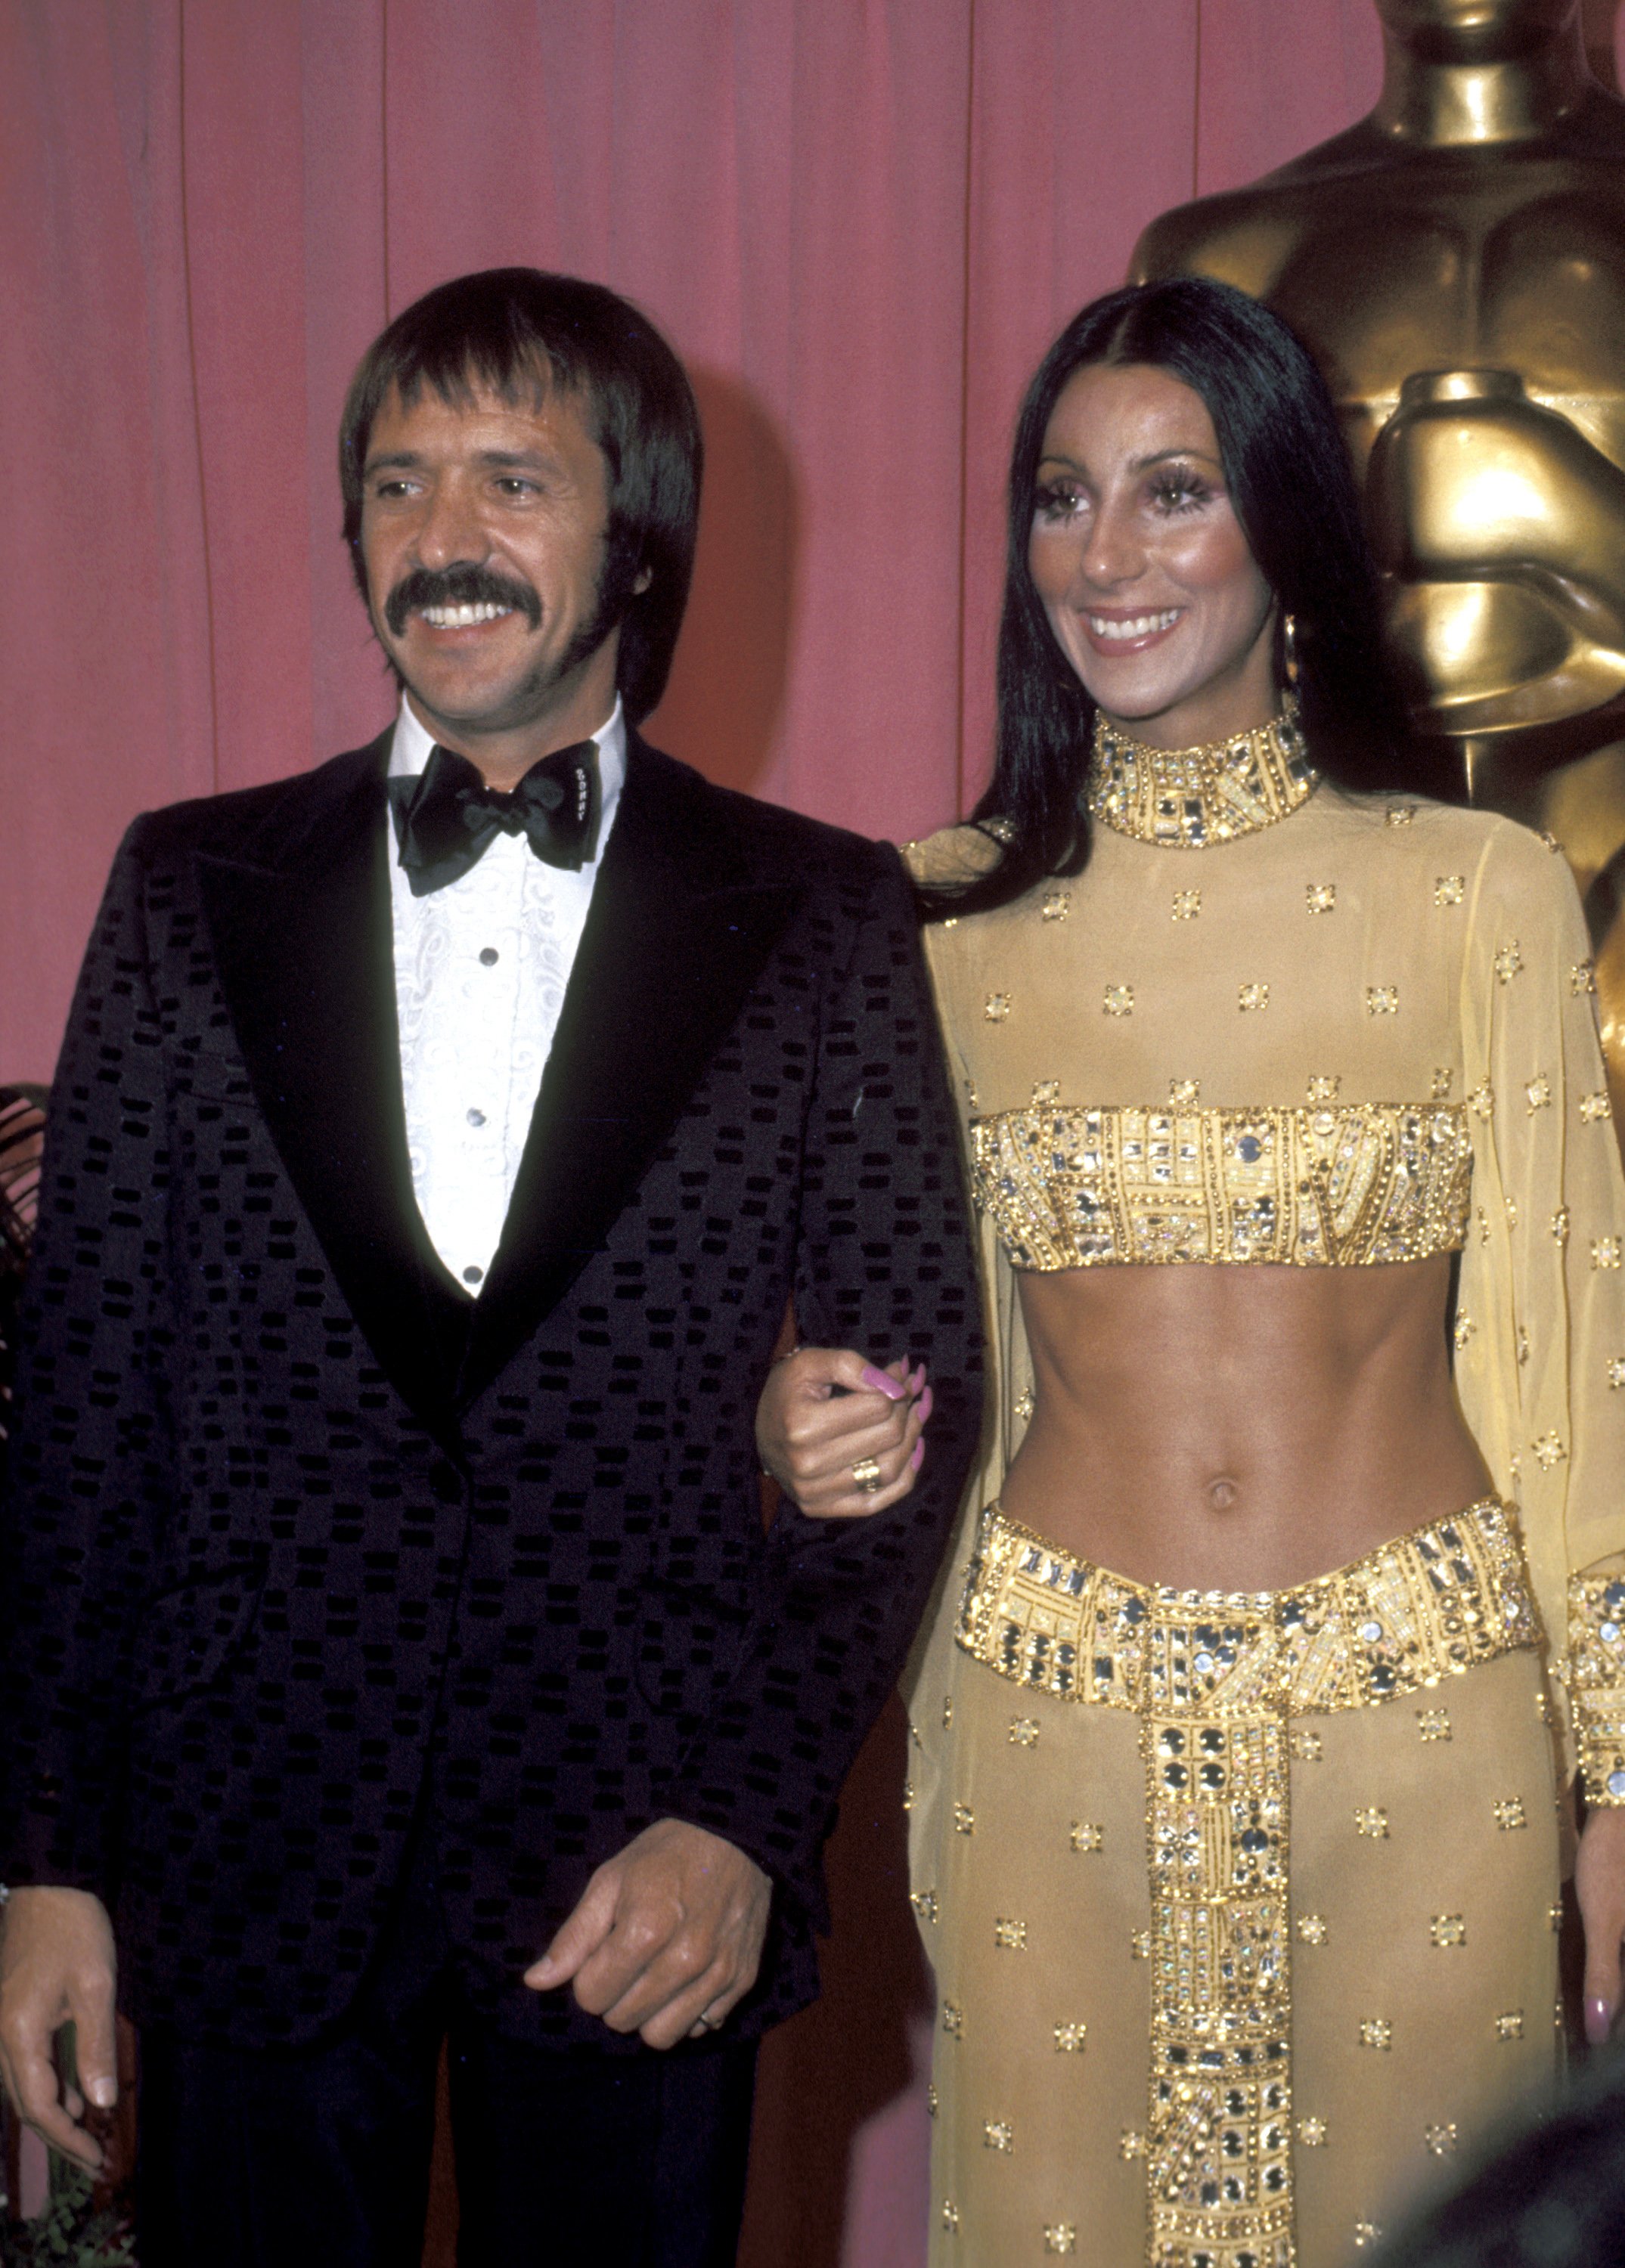 Sonny Bono and Cher at the 45th Annual Academy Awards on March 27, 1973 | Source: Getty Images